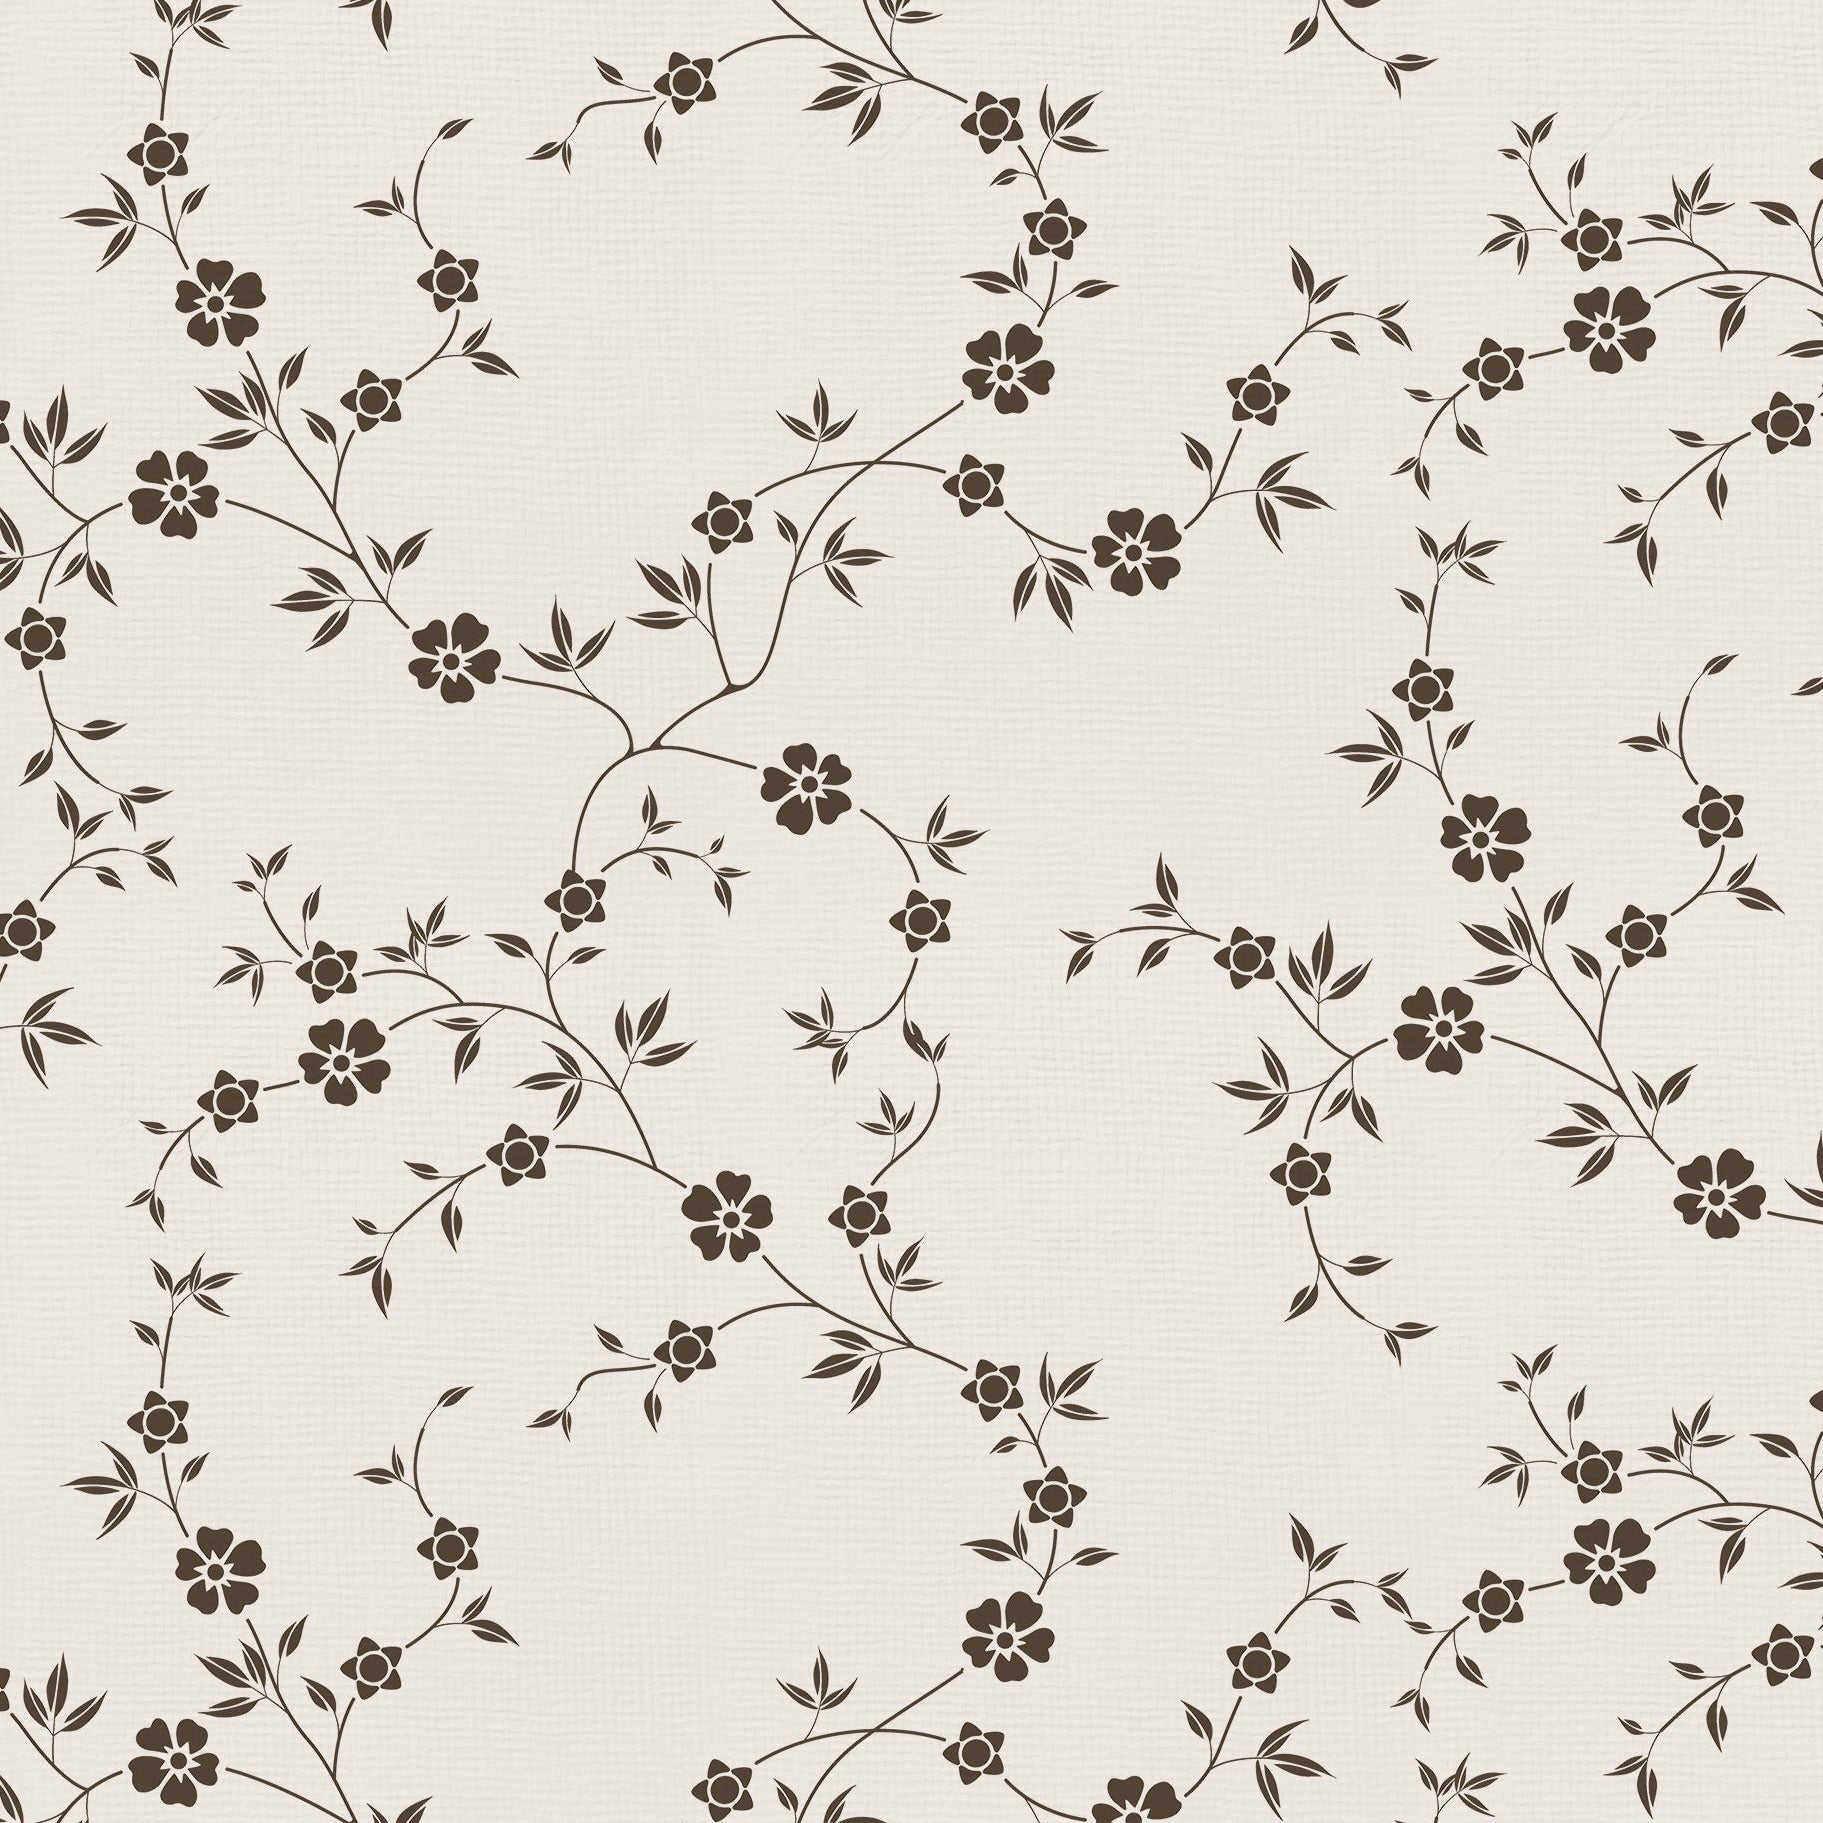 A close-up view of the Charming Floral Wallpaper in Deep Brown, emphasizing the detailed floral design against a soft background. This wallpaper brings a touch of nature indoors with its intricate and compact floral patterns.